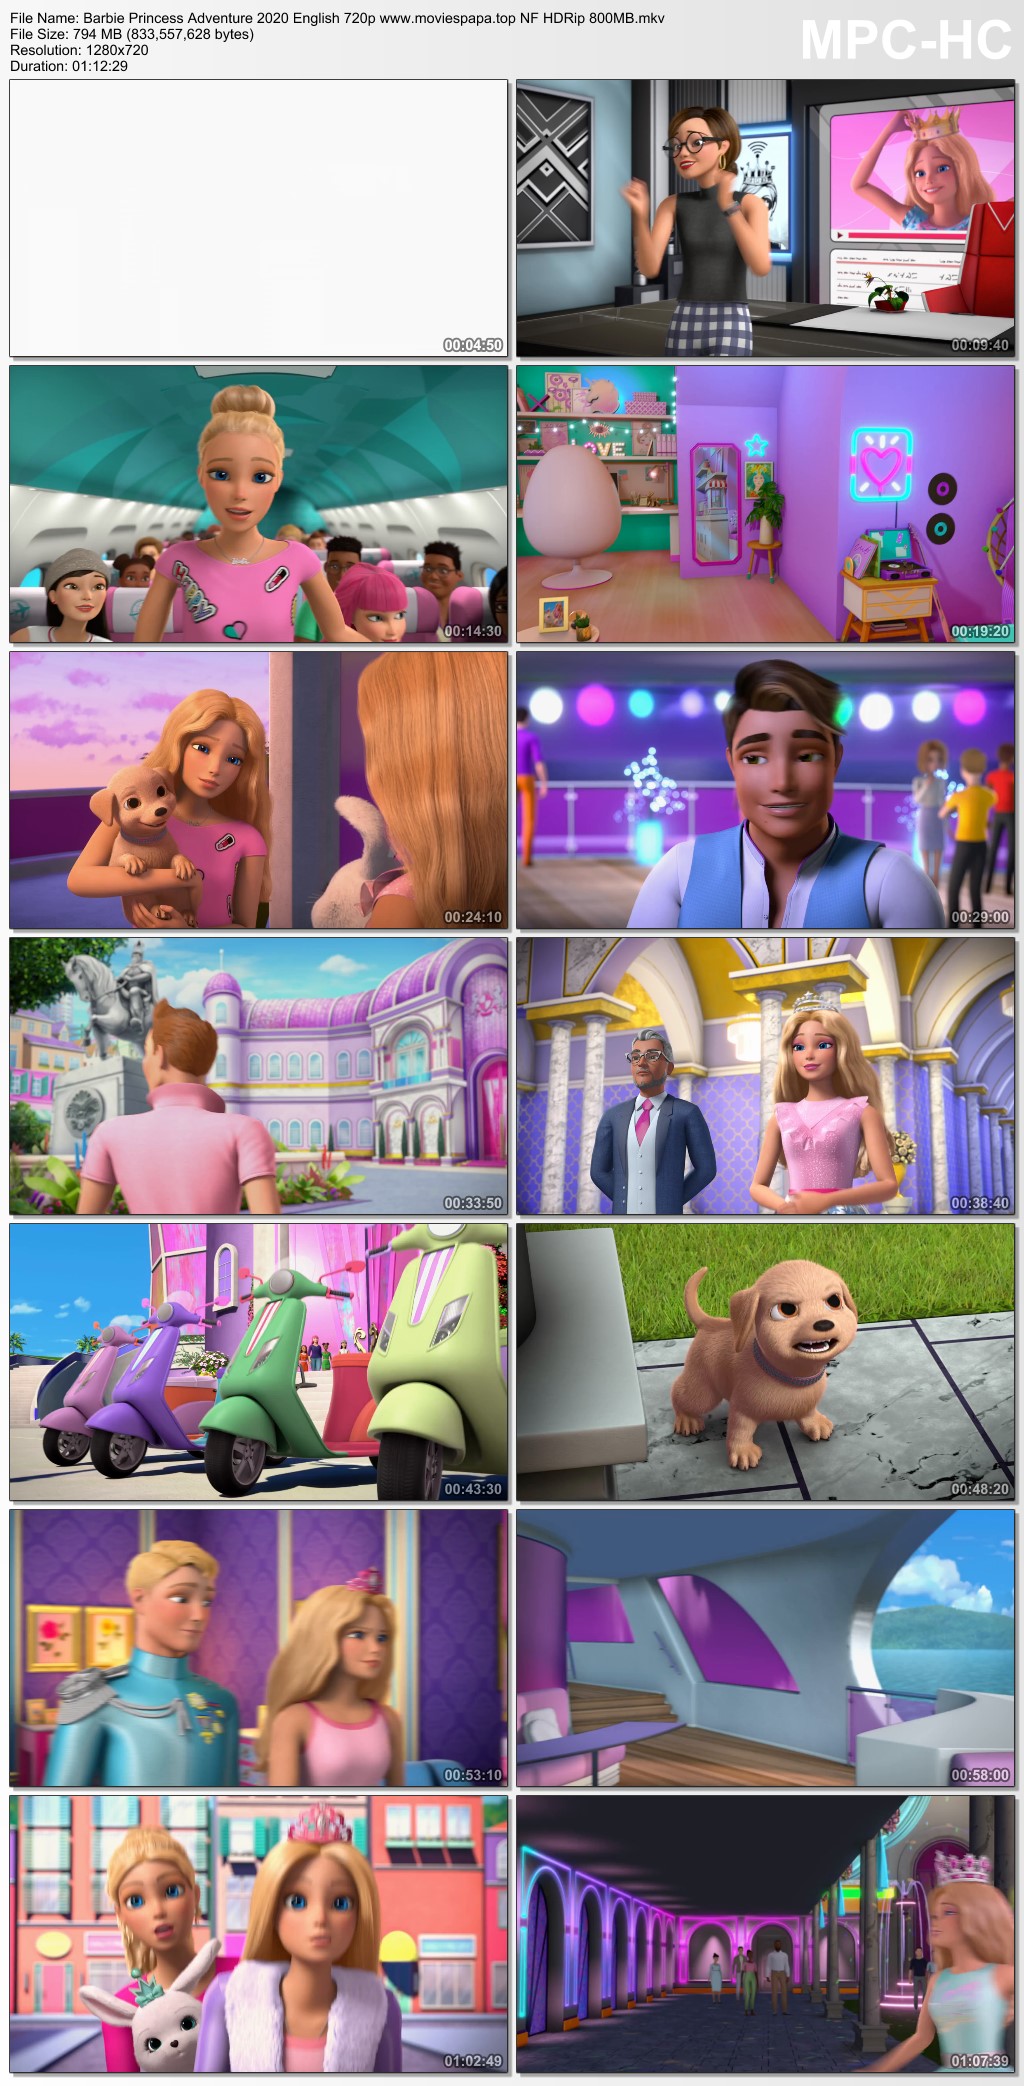 list of all barbie movies in english